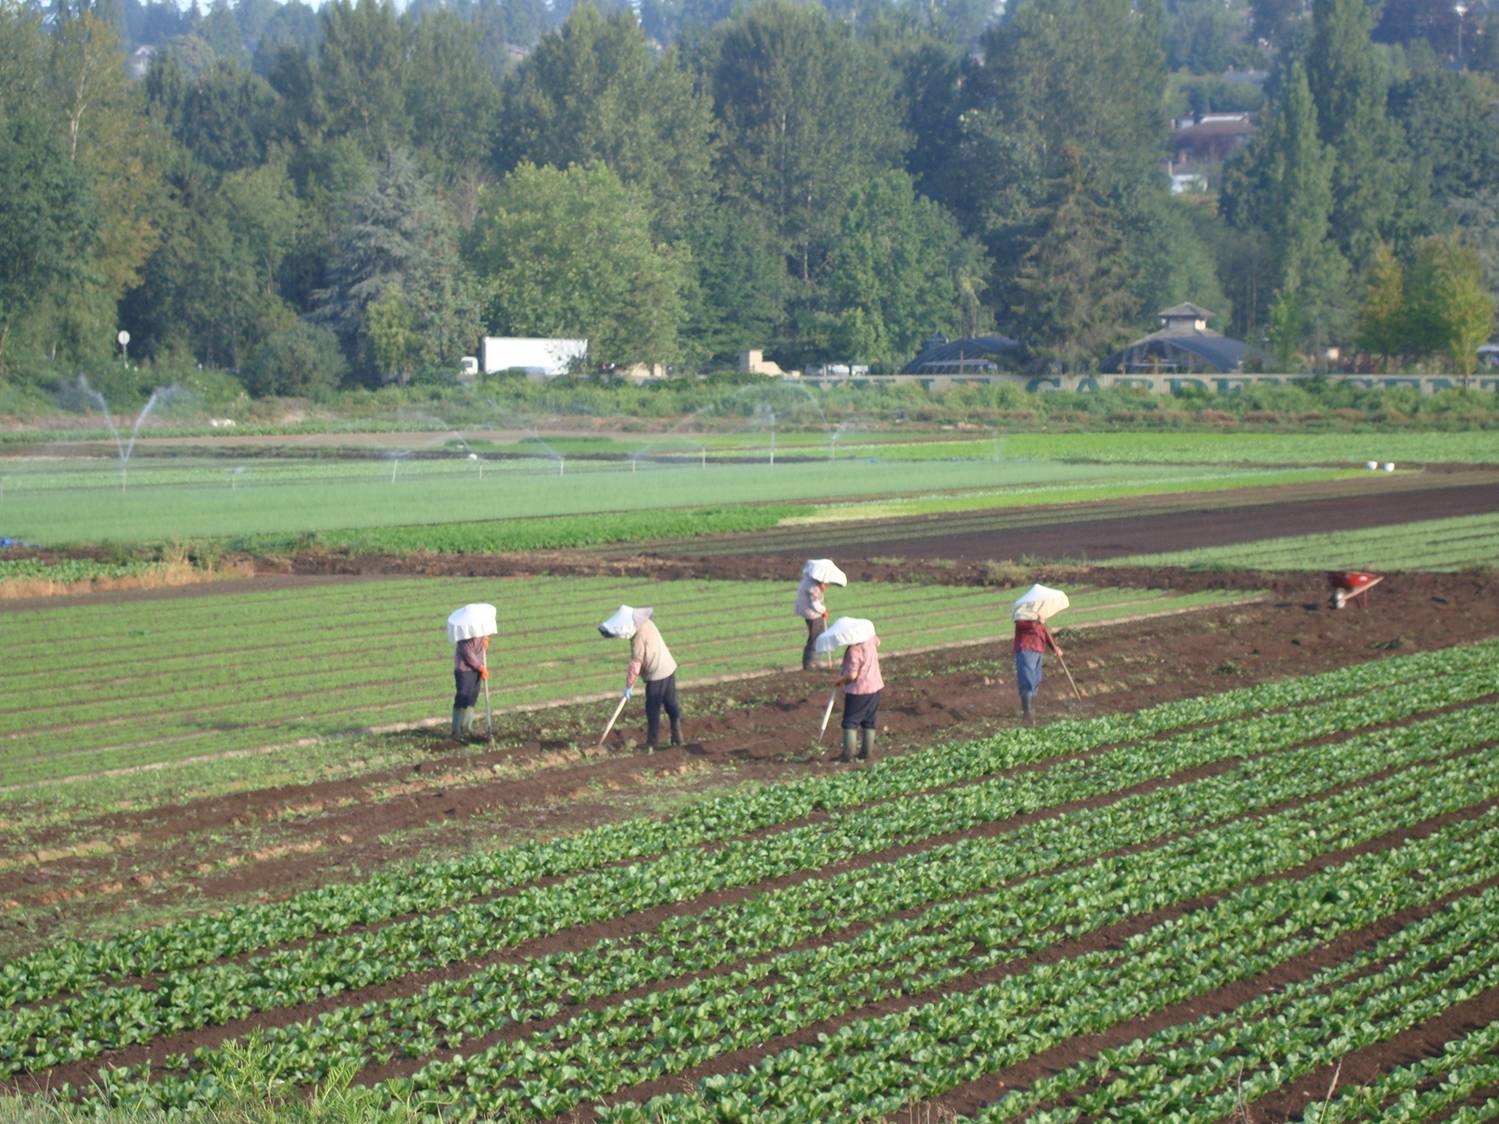 Chinese farm workers in Richmond, B.C., Canada